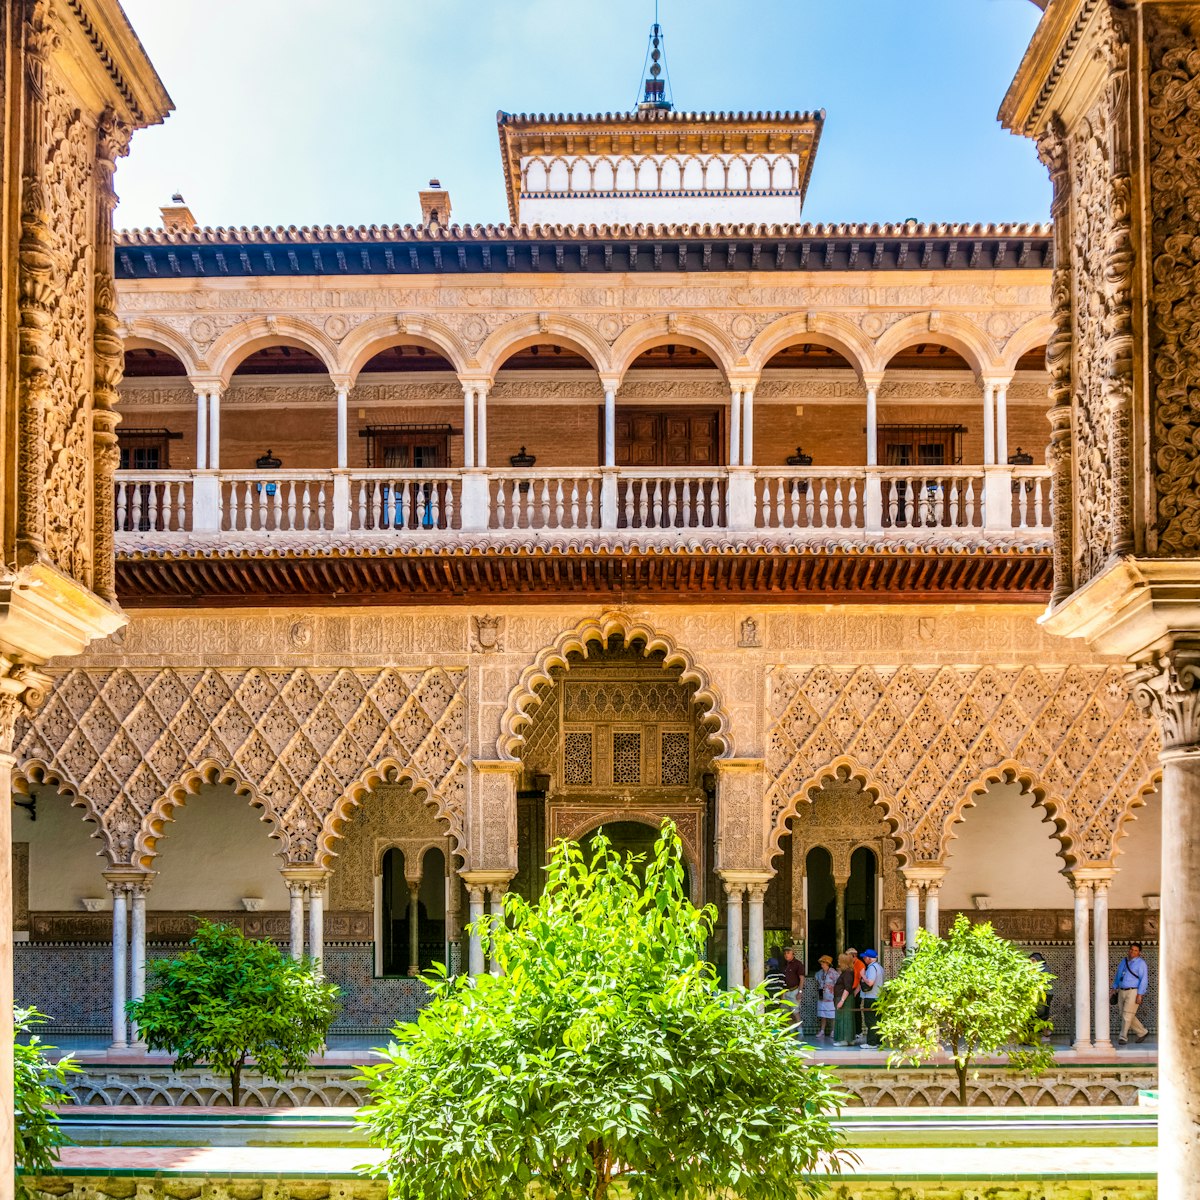 Moorish architecture of beautiful castle called Real Alcazar in Seville, Andalusia, Spain.